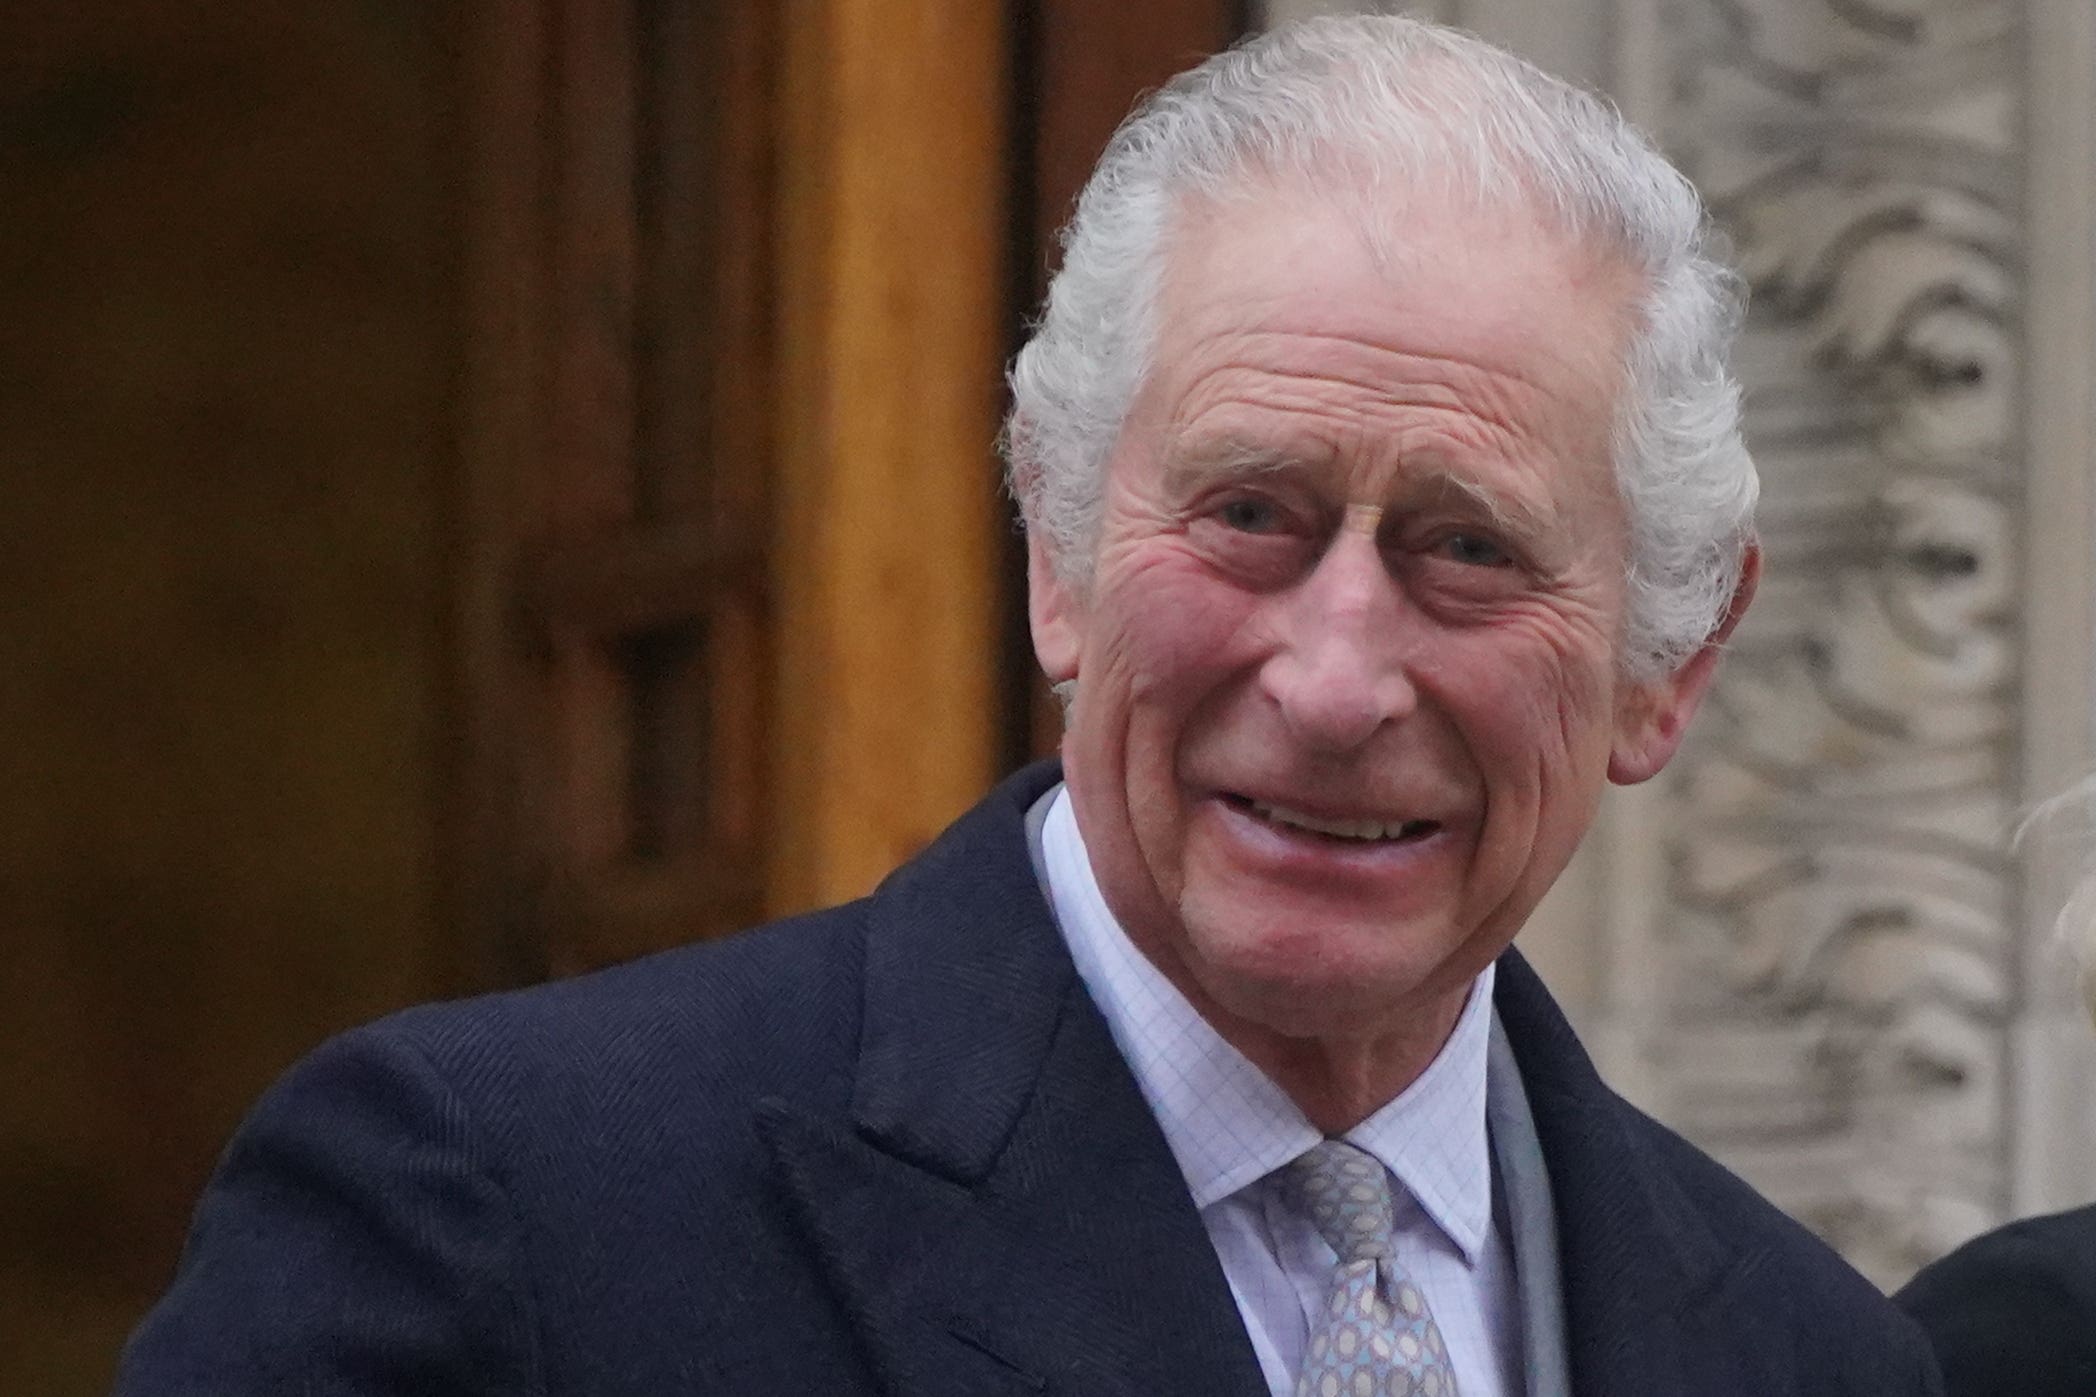 The King has apologised as his forthcoming public duties have been postponed (Victoria Jones/PA)